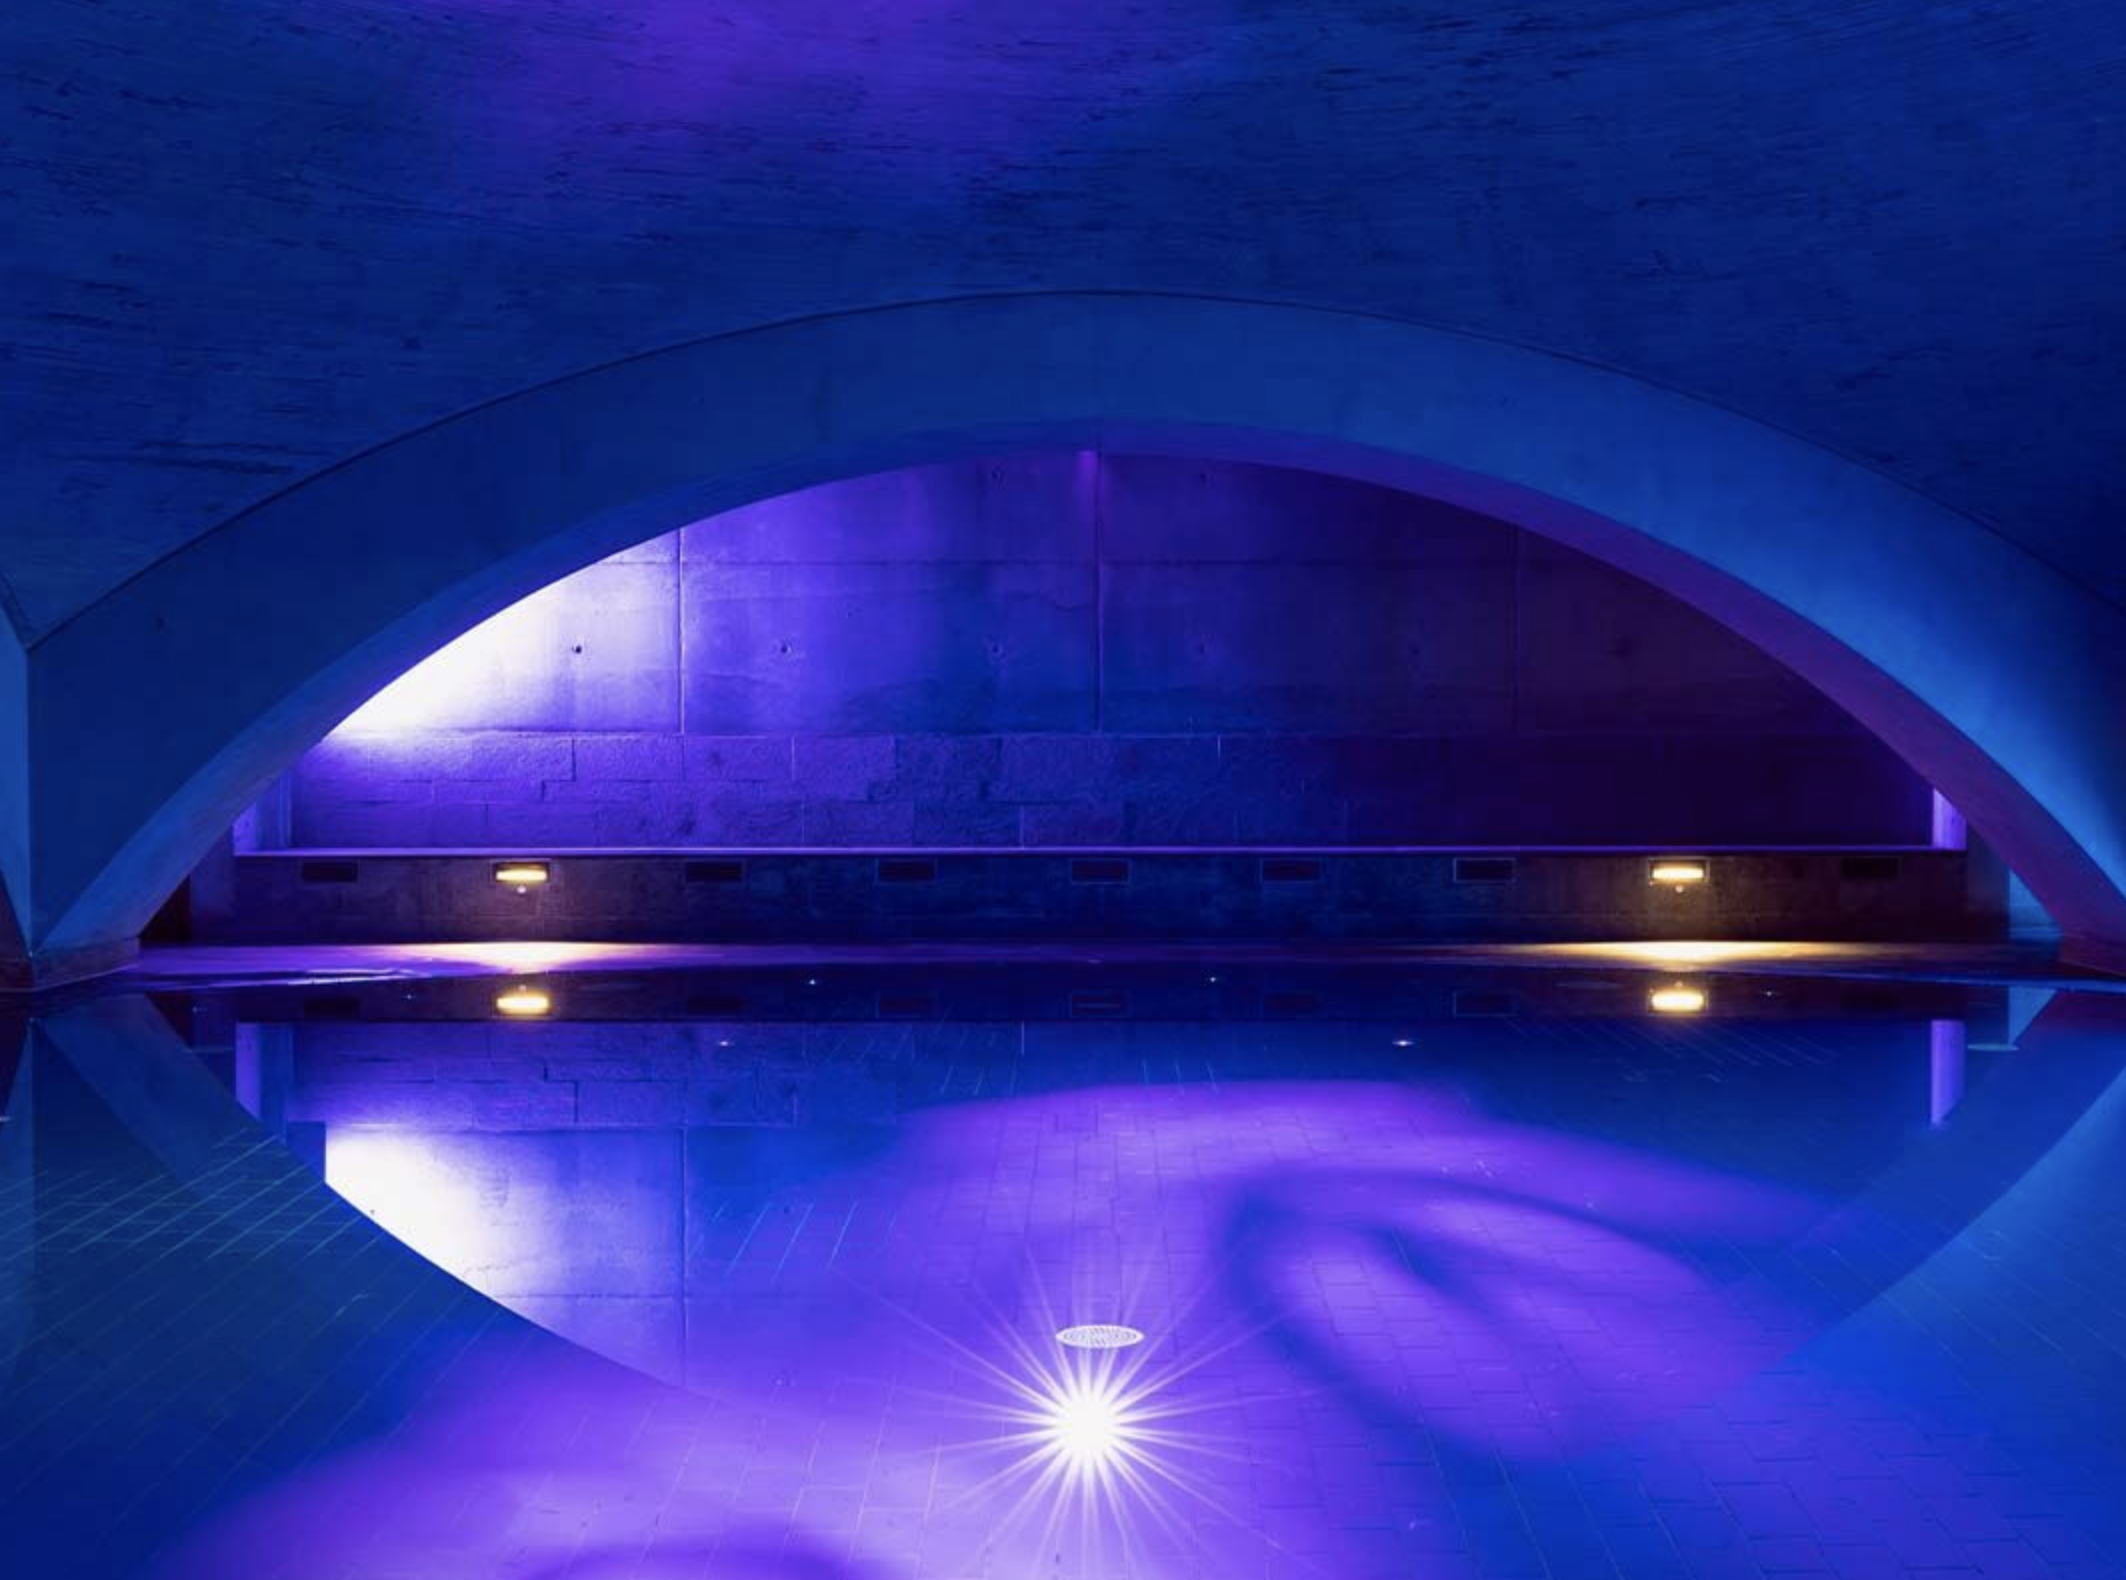 Picture of a subterranean pool in purple light with an arch shape over the top